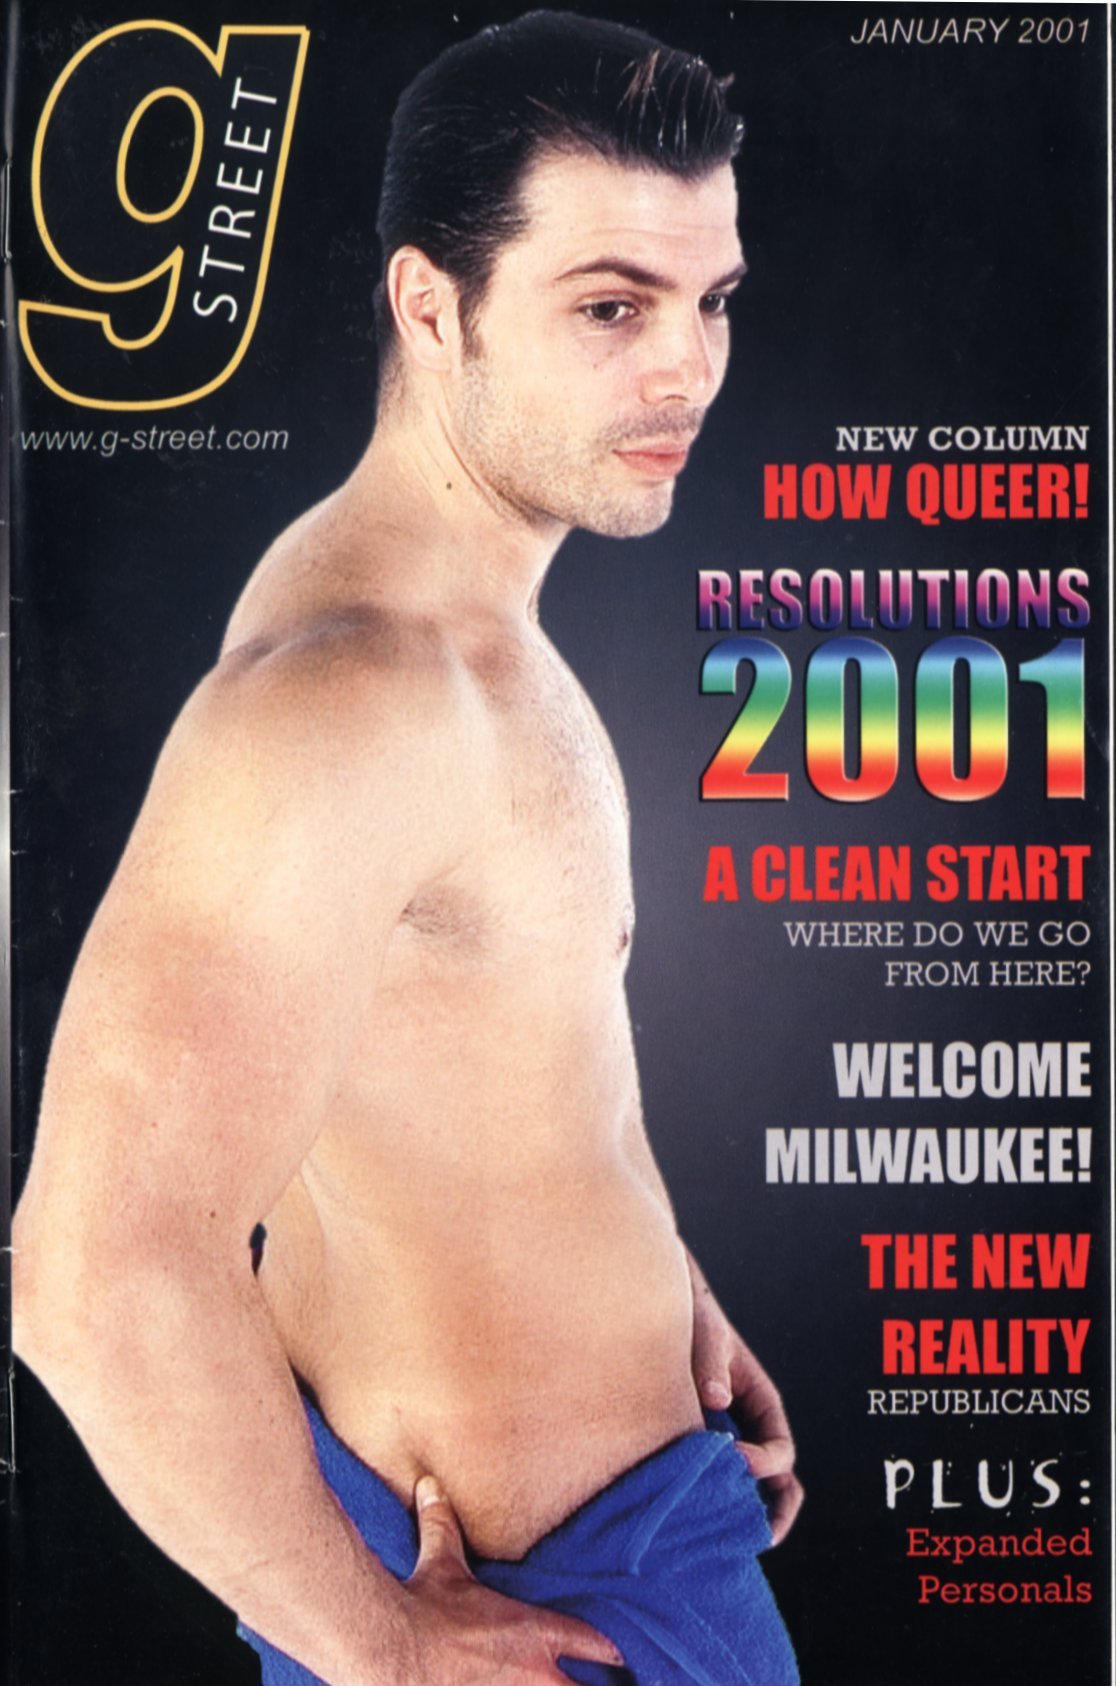 Issue 7, January 2001